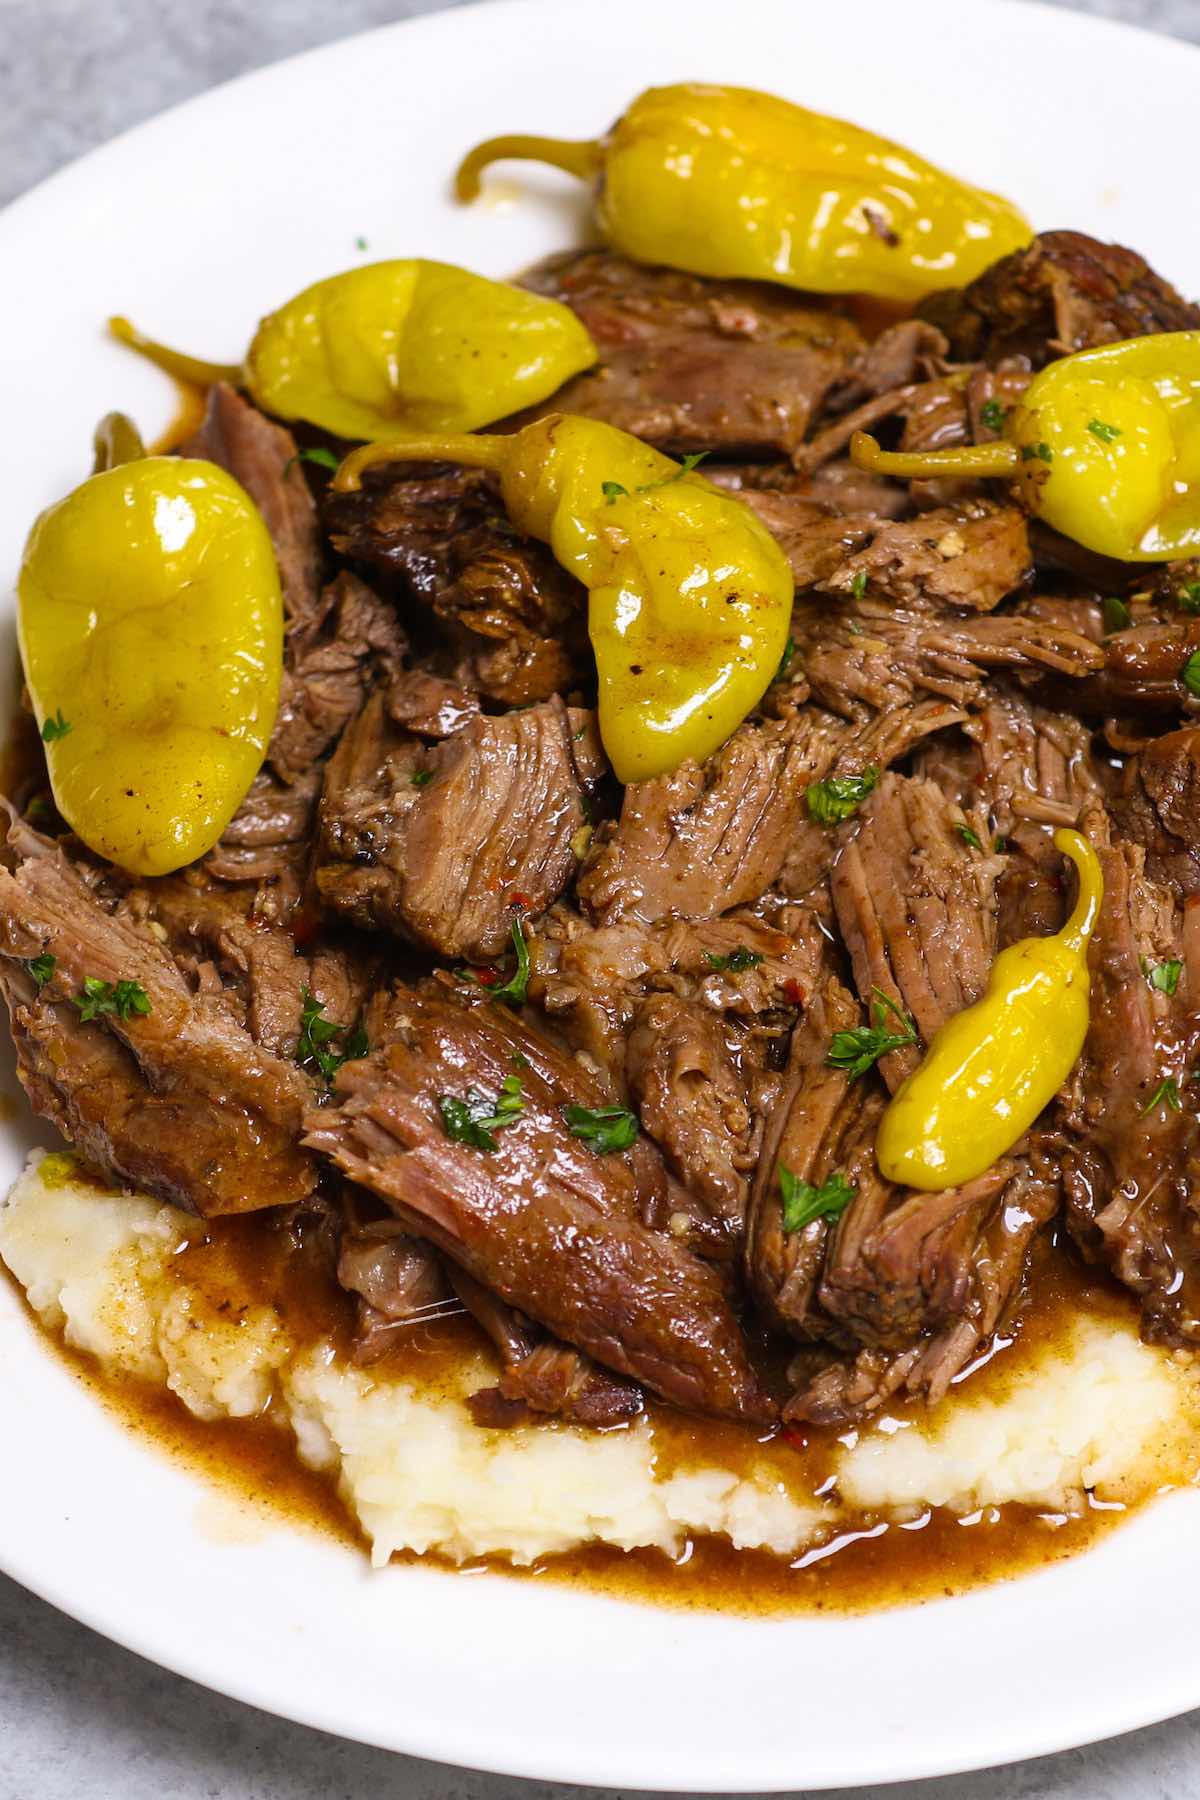 Mississippi Pot Roast is a fork-tender chuck roast that’s full of flavor! This no-fuss “dump and go” pot roast recipe is made with 5 ingredients in a crockpot with only 10 minutes of prep!